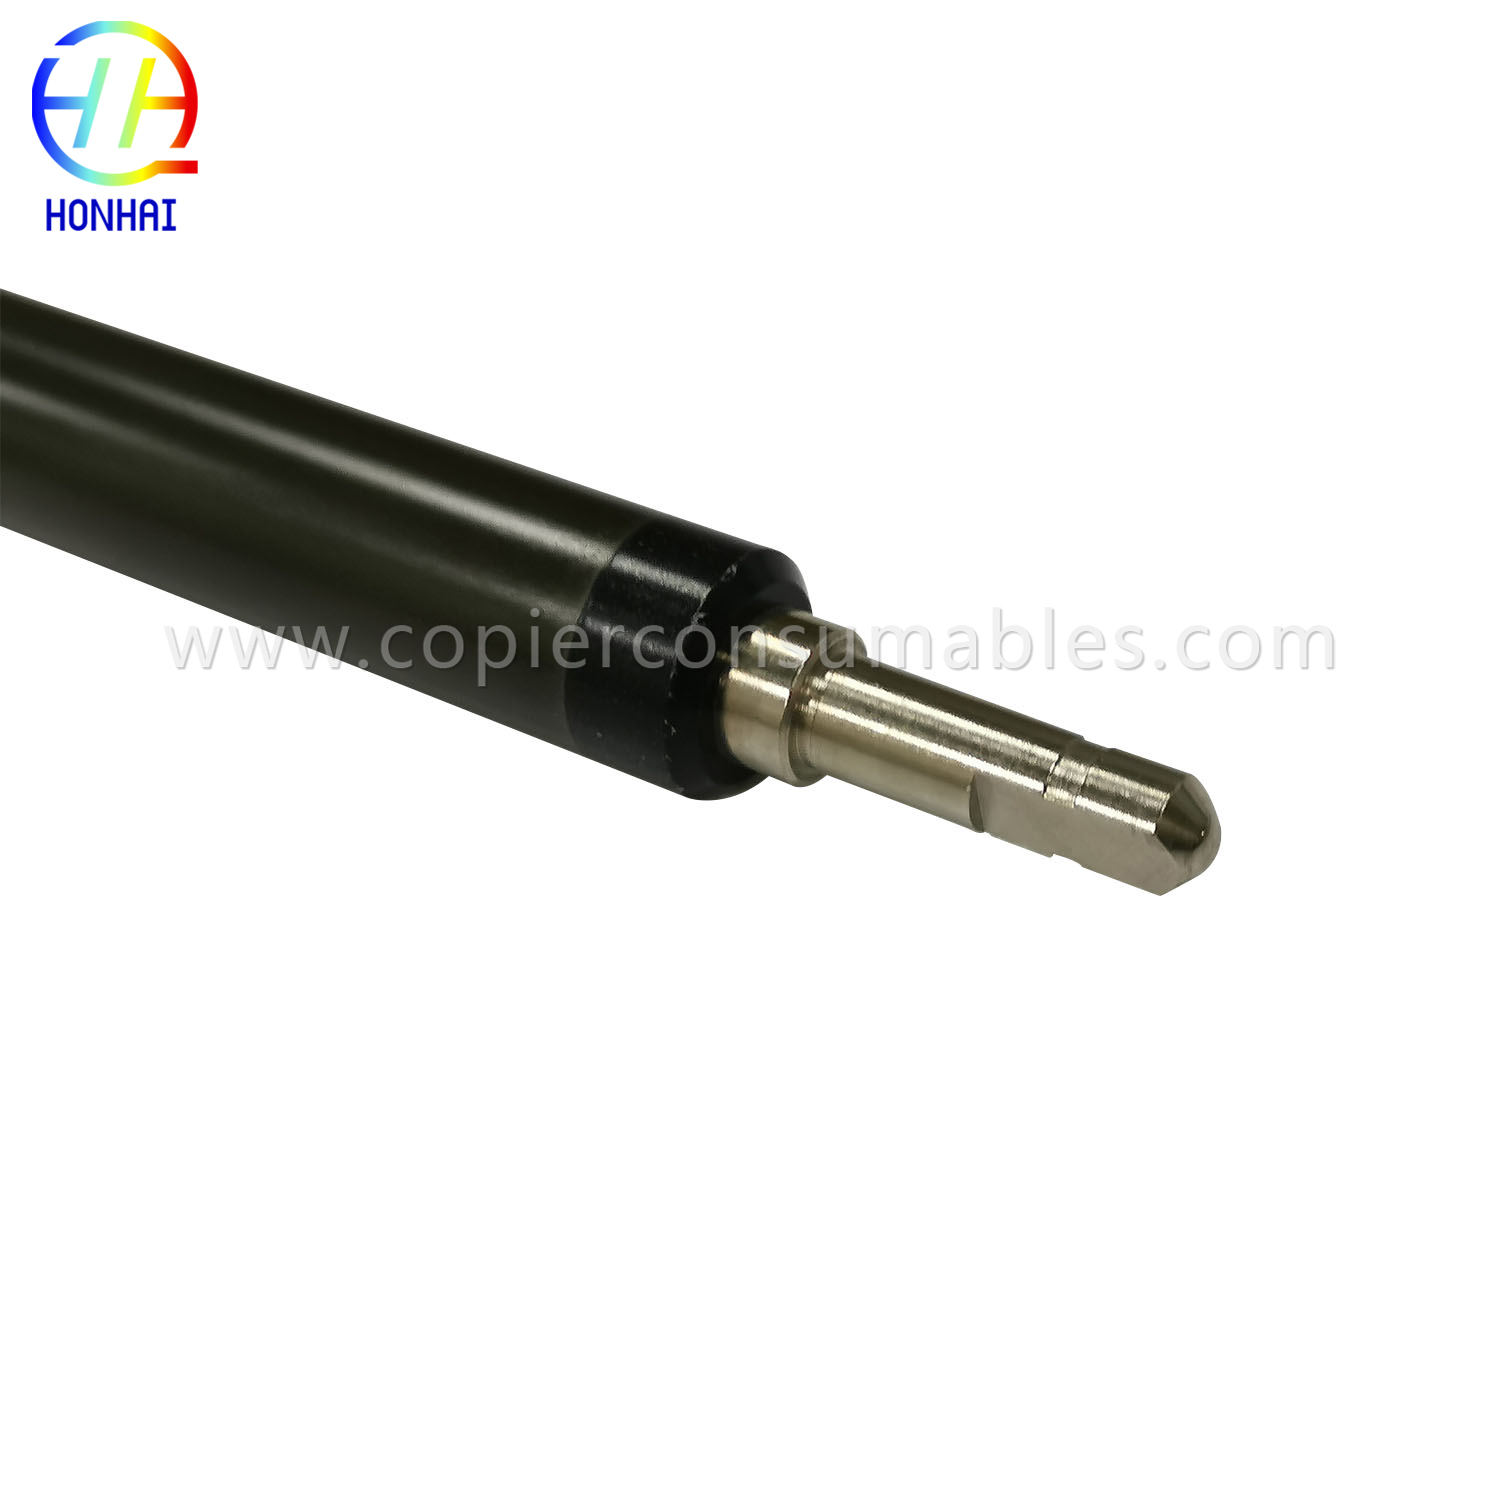 Isi Charge Roller PCR maka Ricoh MPC8002 MPC6502 C6502 8002 6502 Pro C751 C751S C5110 C5100 C651(9)